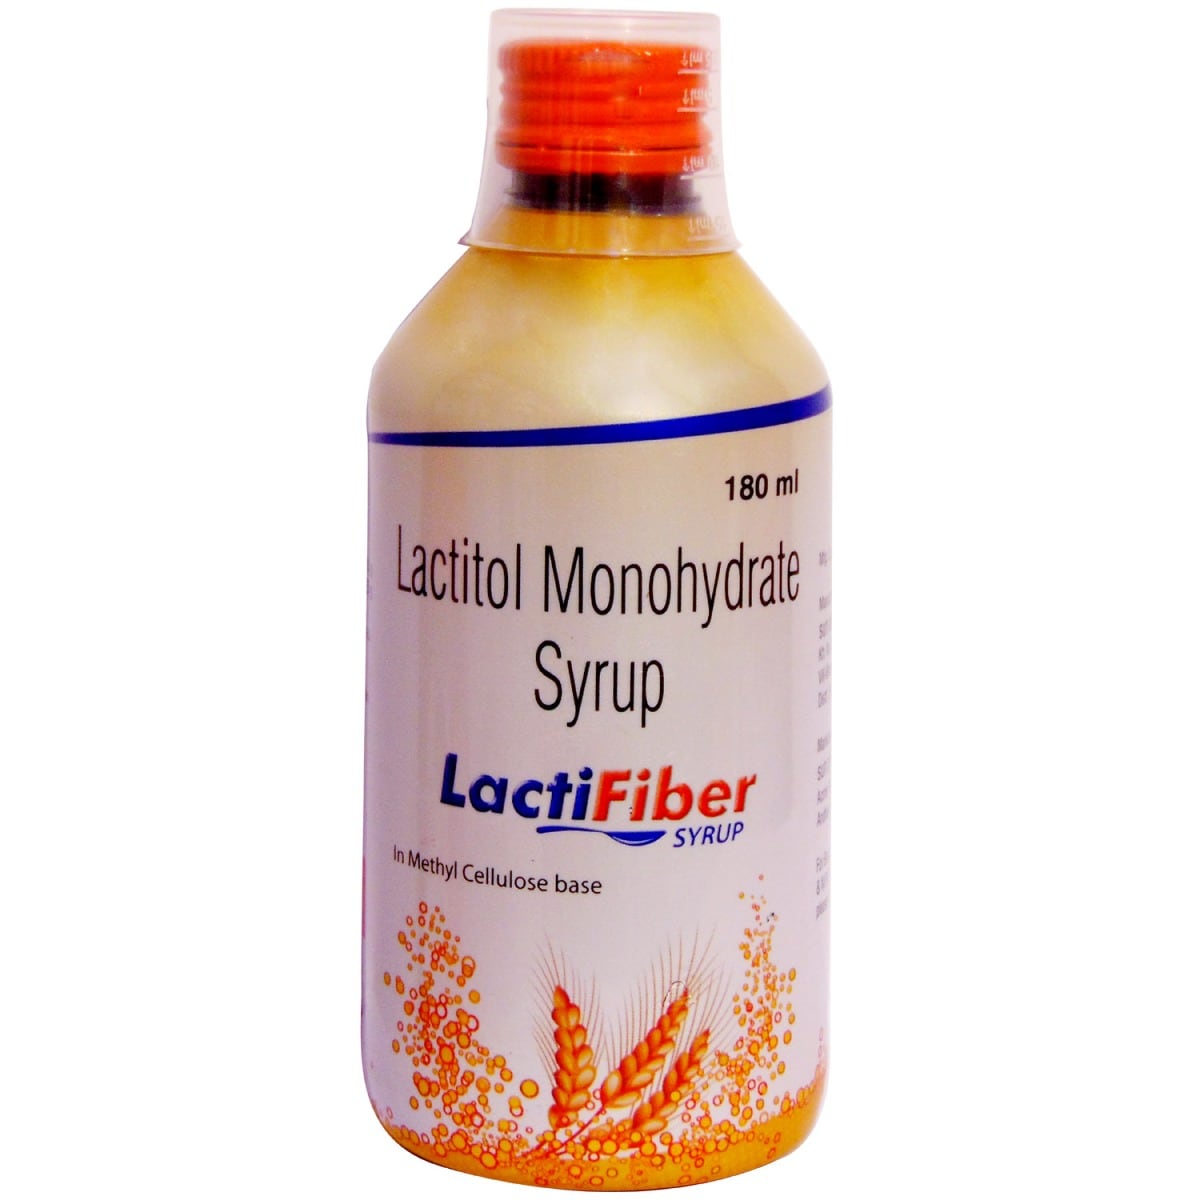 Lactifiber Syrup